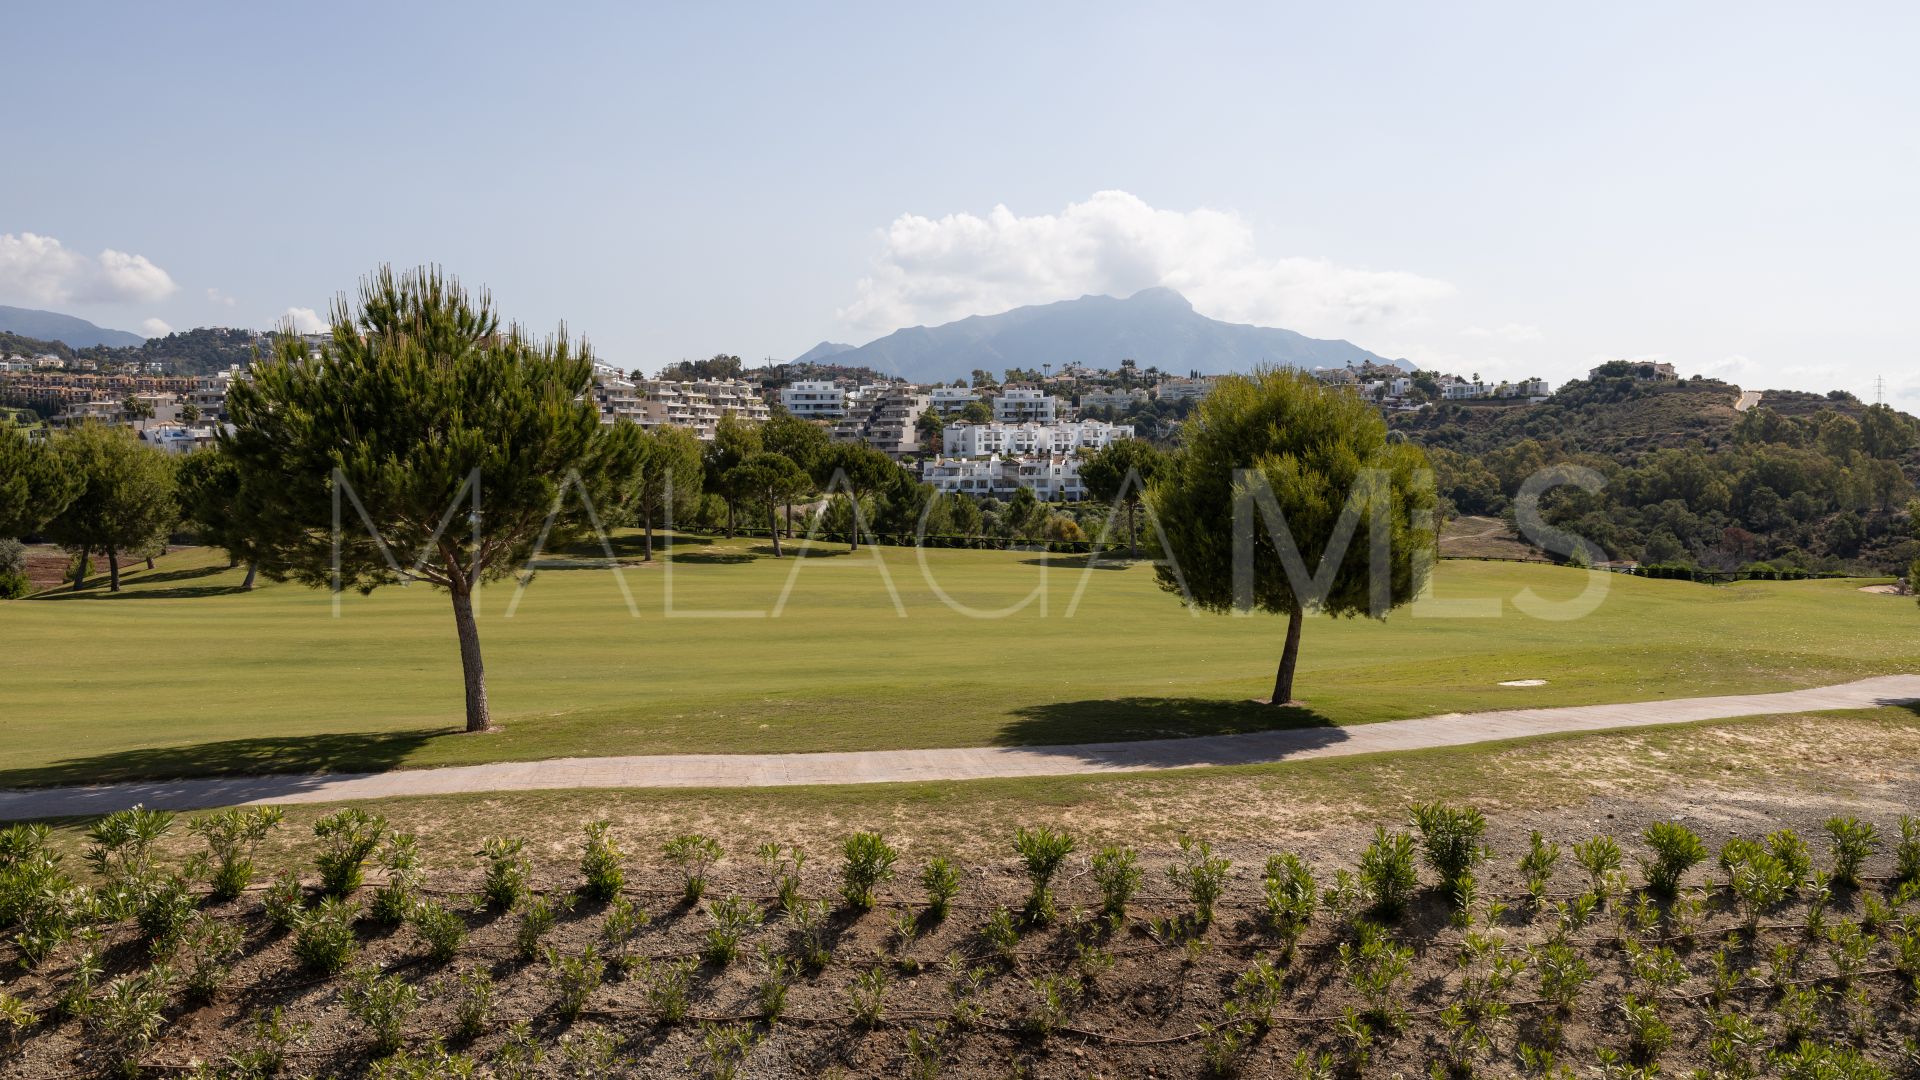 4 bedrooms duplex penthouse in Los Capanes del Golf for sale